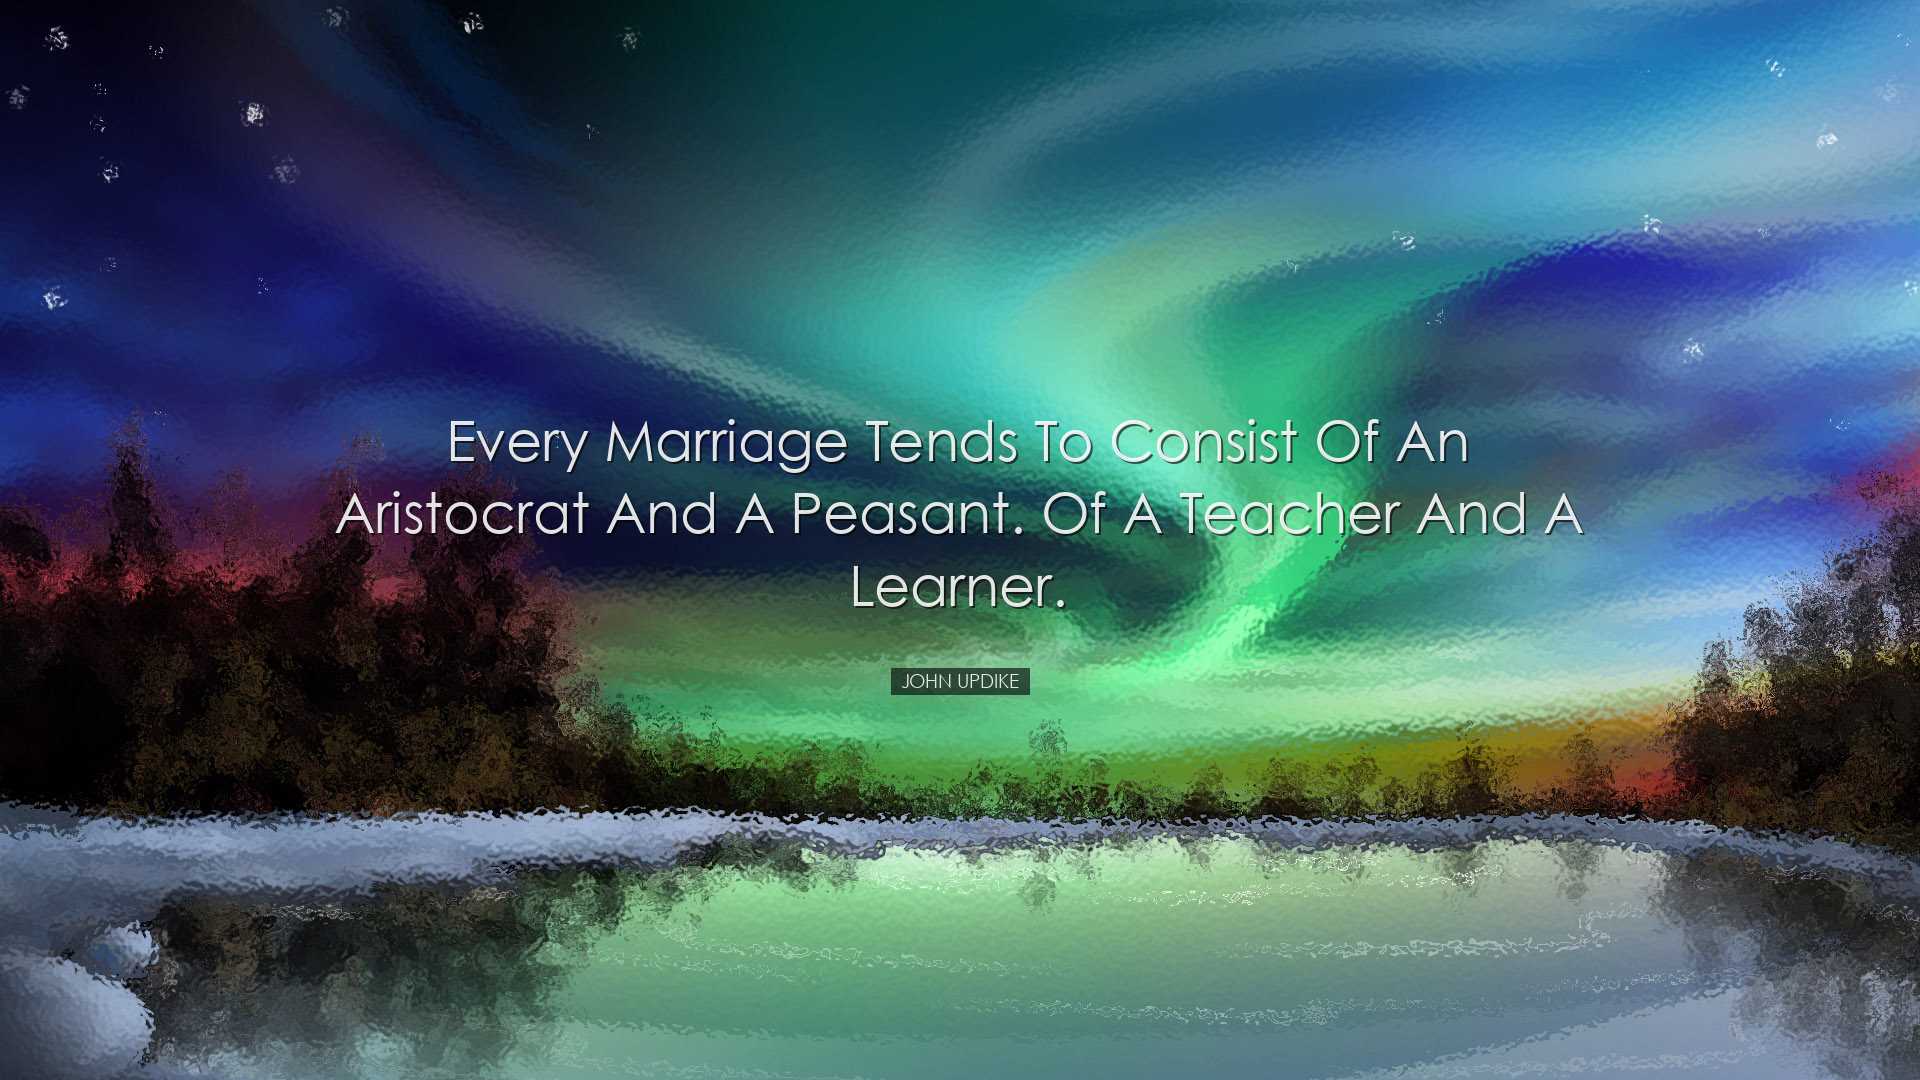 Every marriage tends to consist of an aristocrat and a peasant. Of